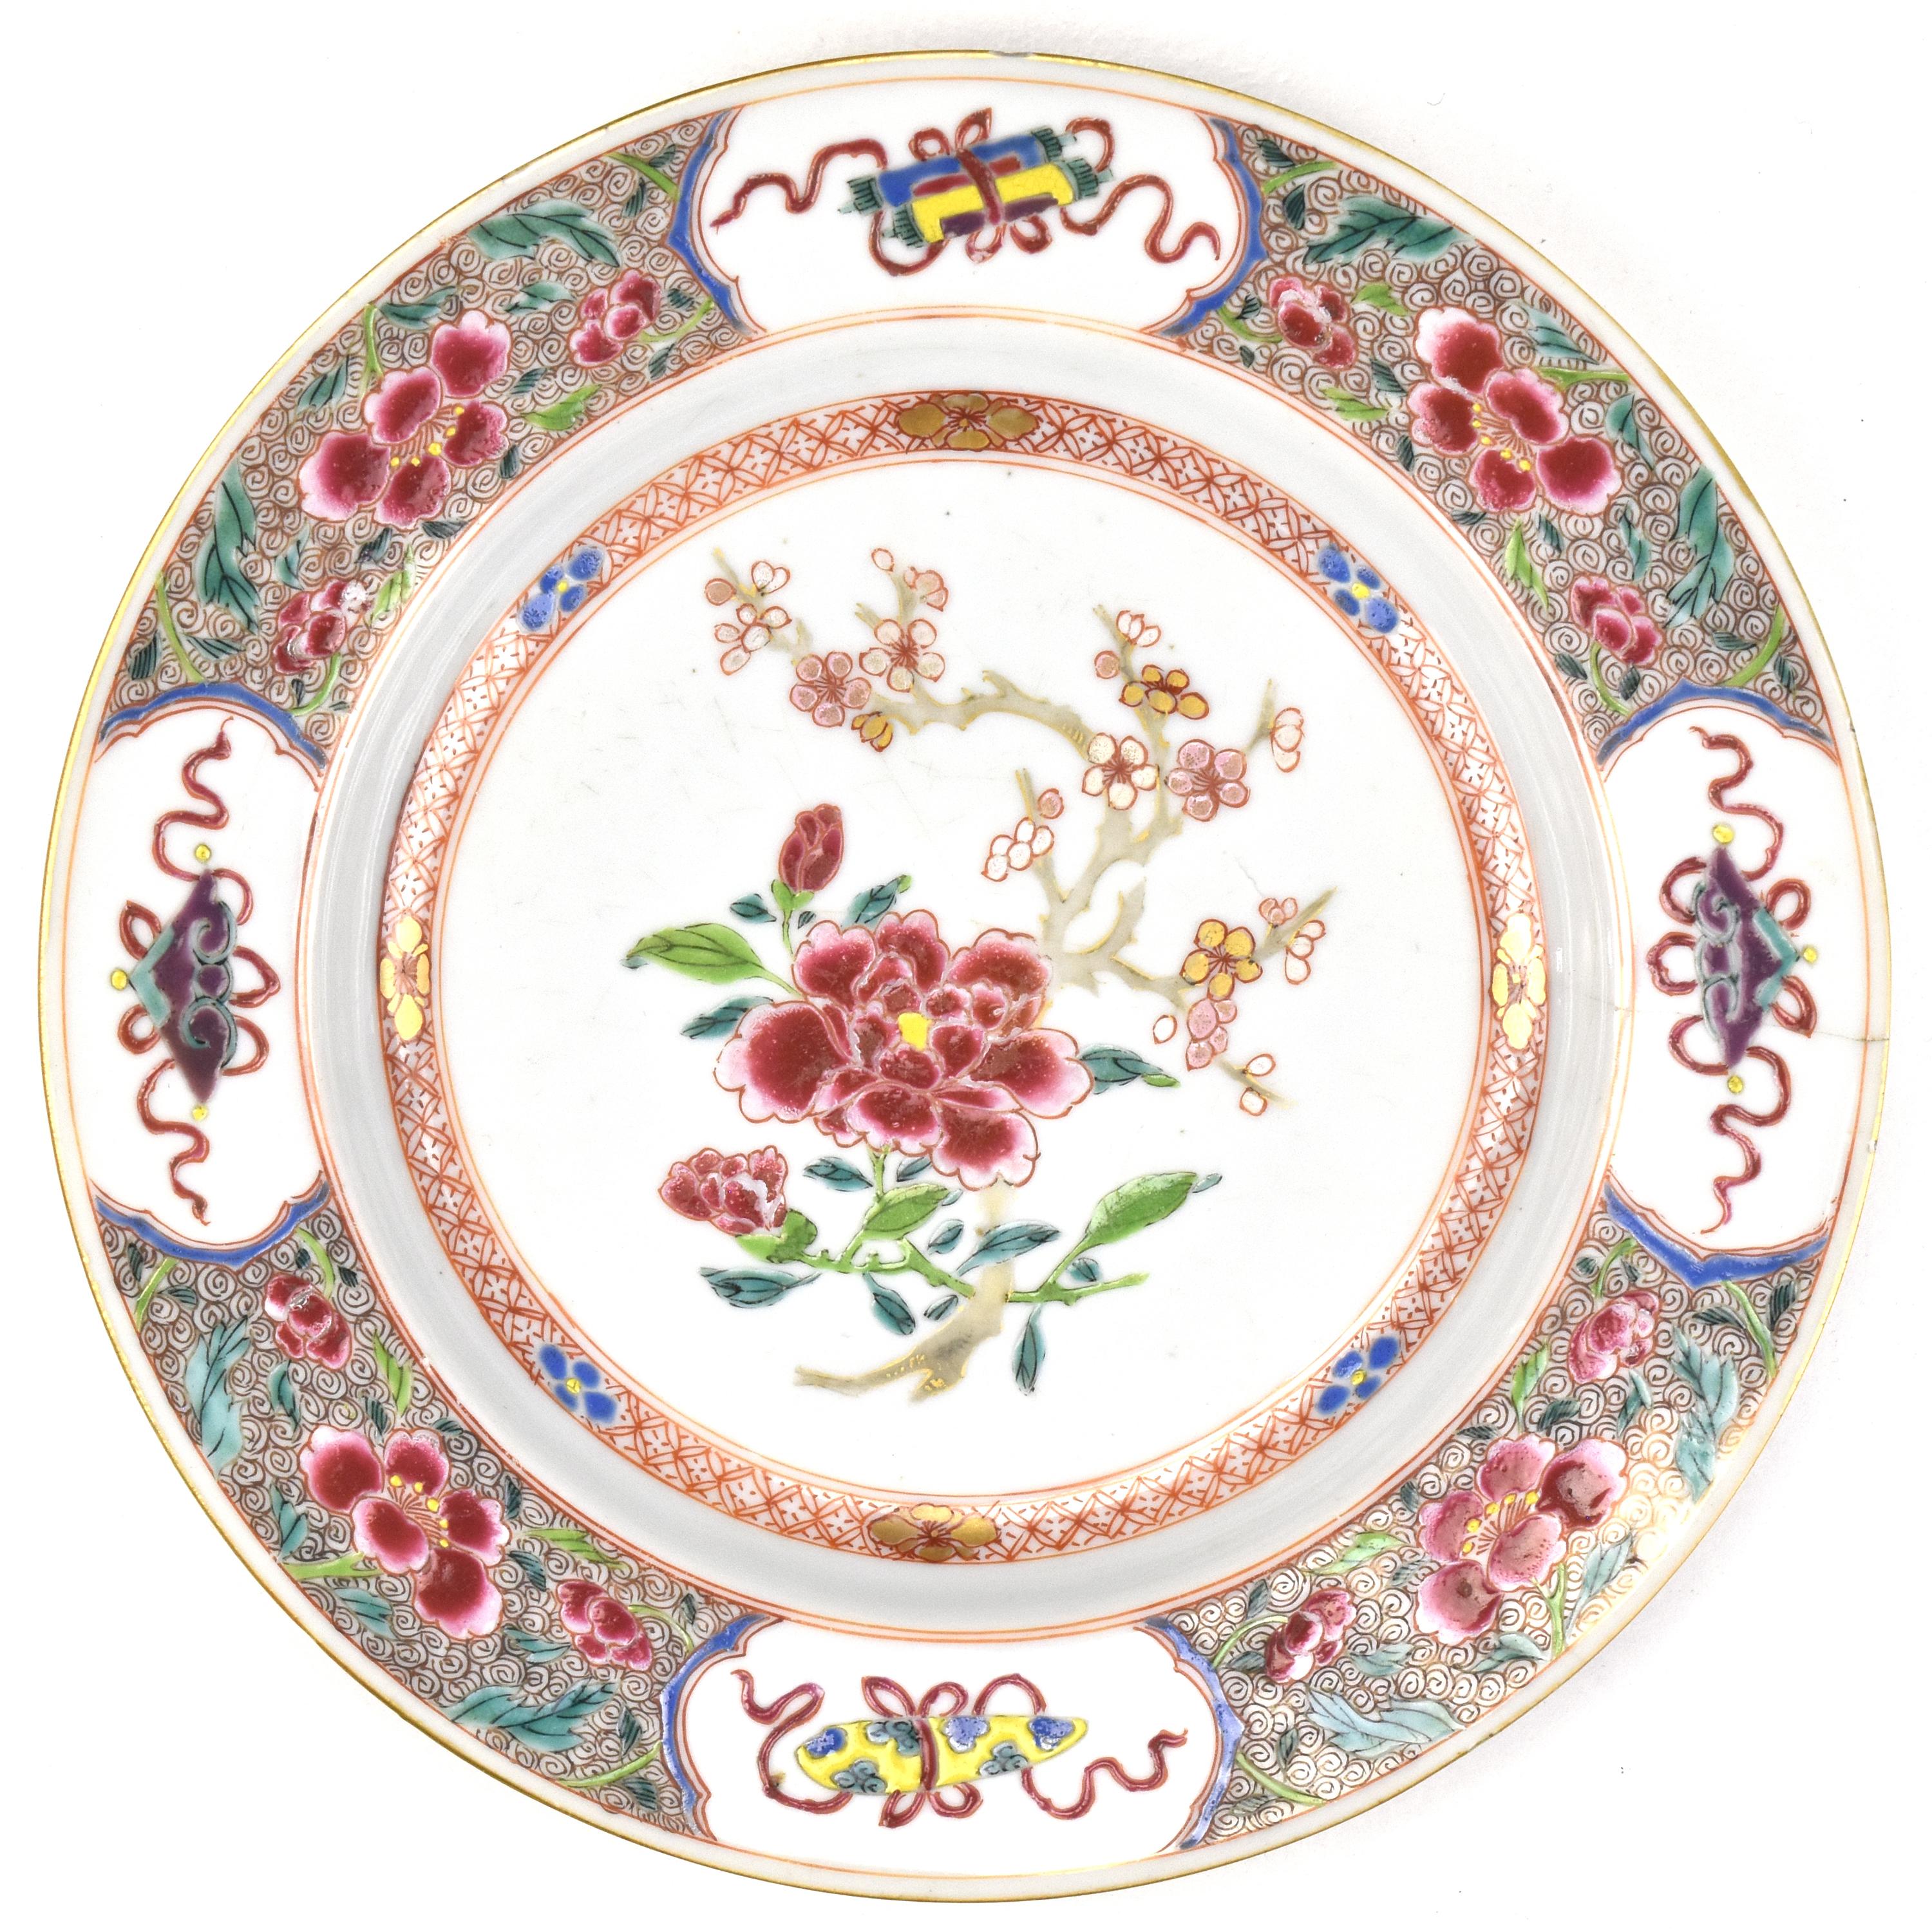 This antique Kangxi plate is a truly exceptional piece of porcelain craftsmanship. It showcases an exquisite level of detail in its design, featuring a delicate chrysanthemum and prunus branch pattern in centre. This pattern is a testament to the